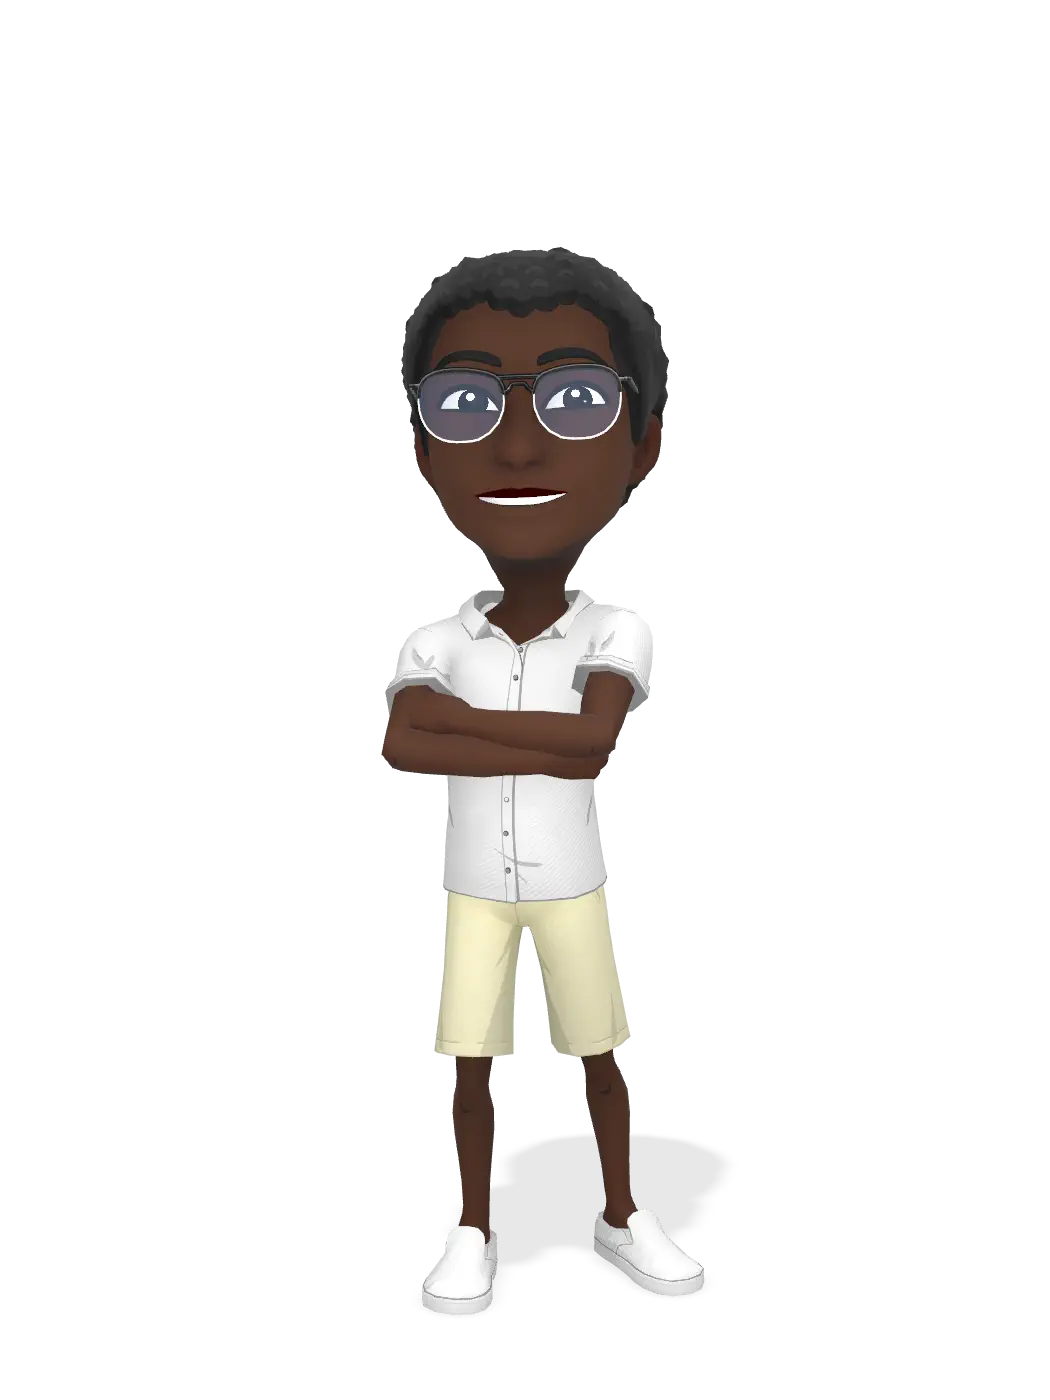 3D Bitmoji for c3_therealcc